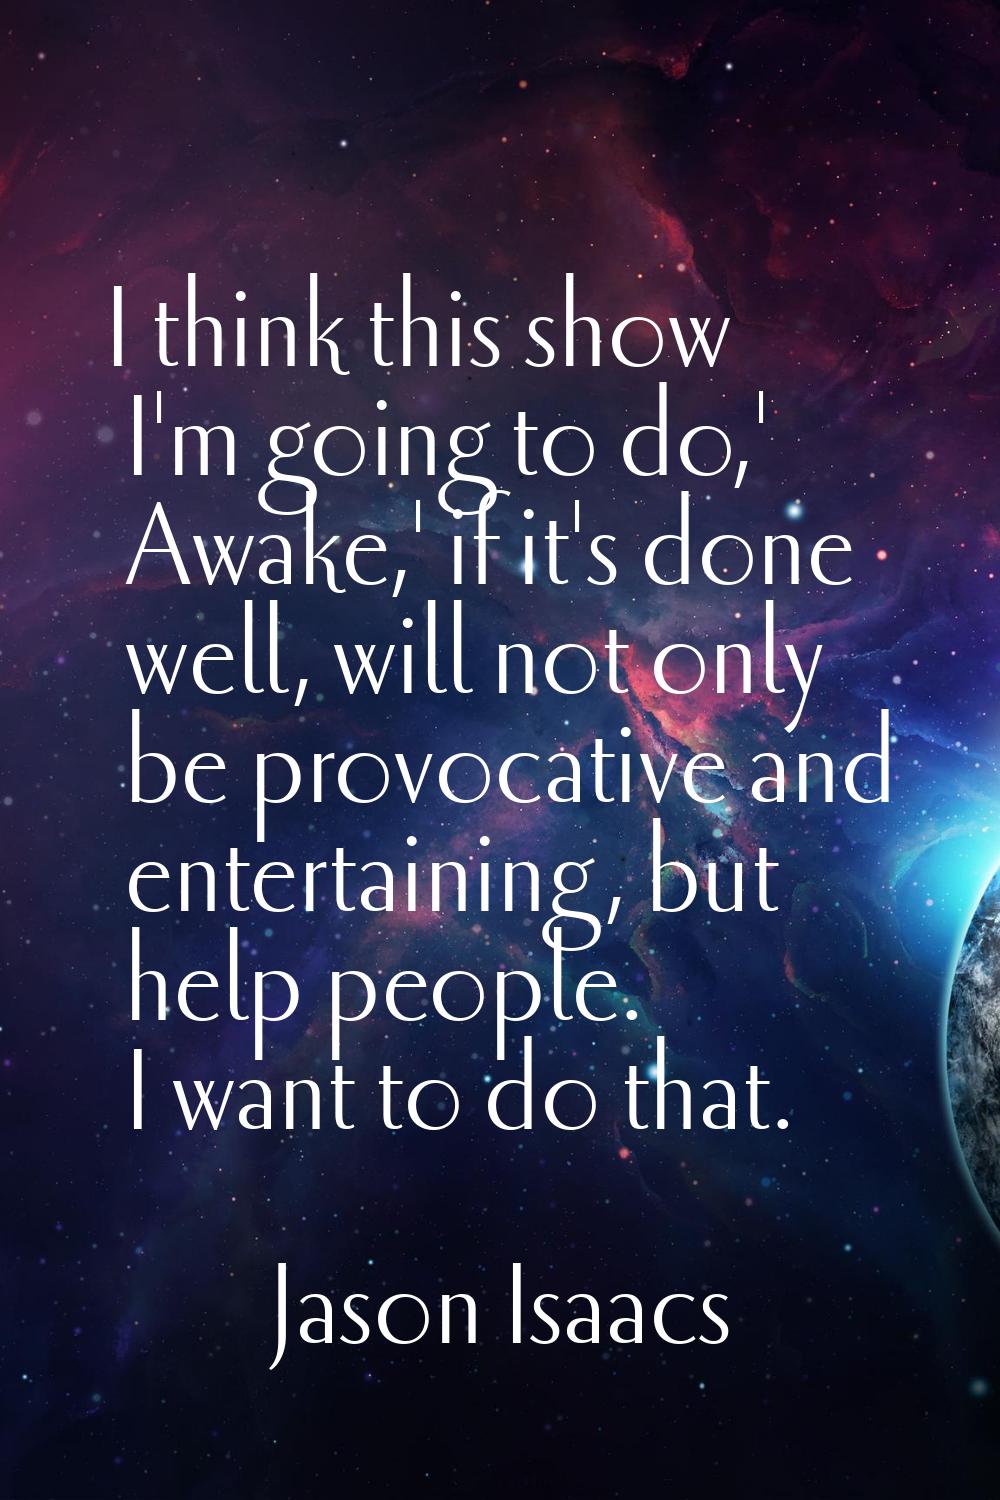 I think this show I'm going to do,' Awake,' if it's done well, will not only be provocative and ent